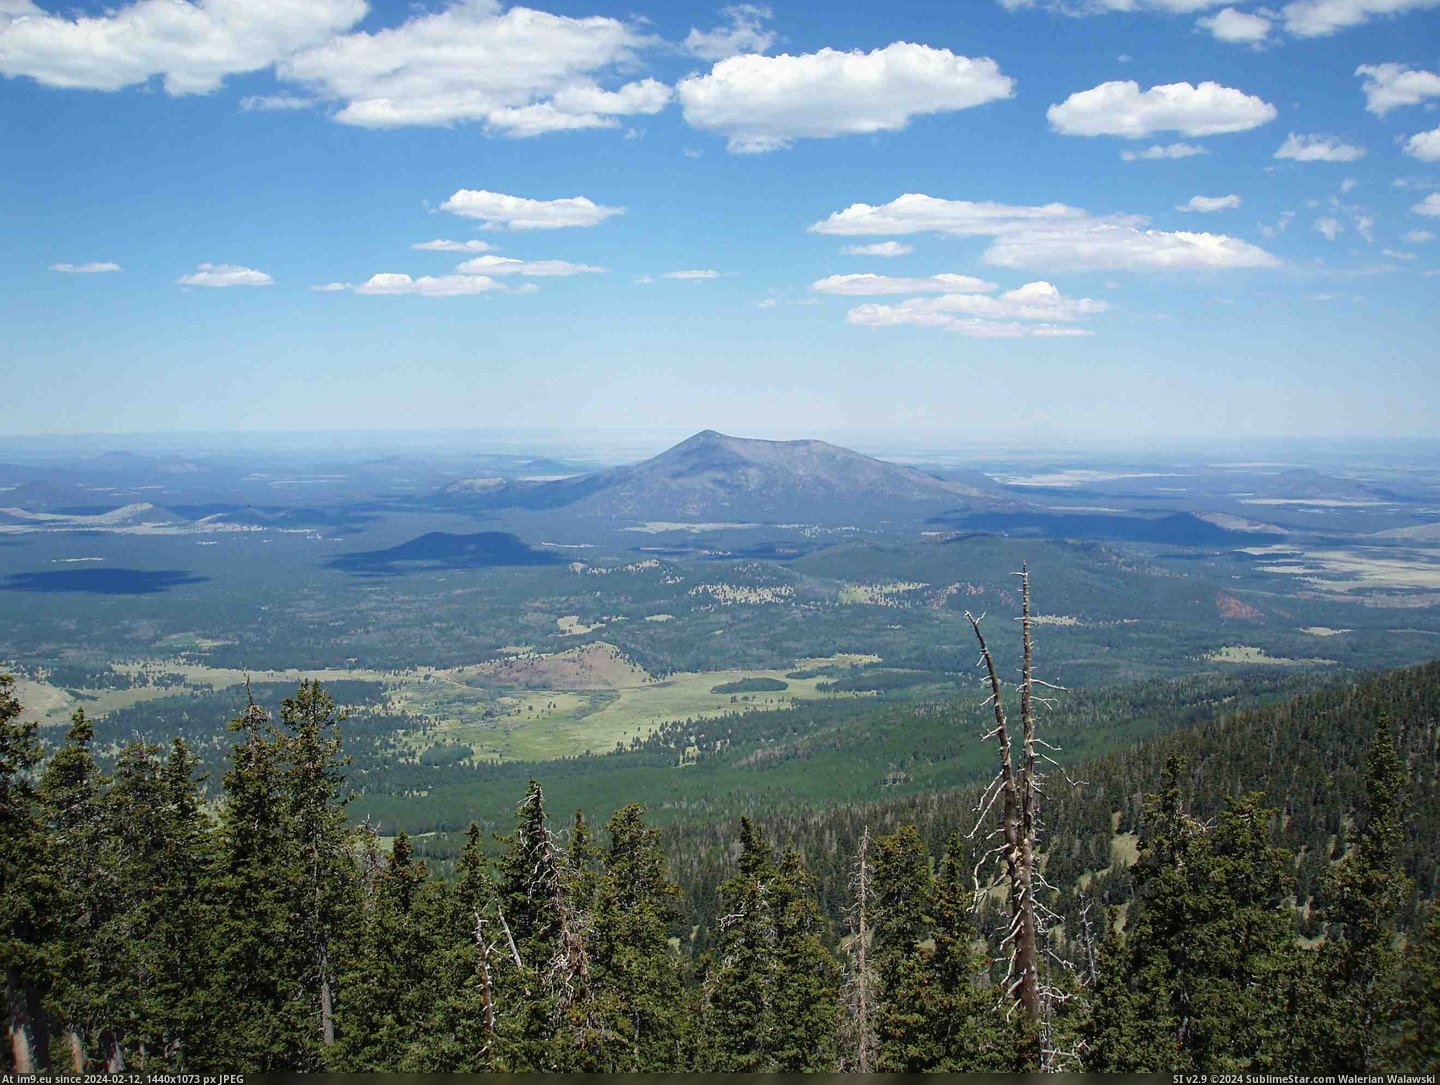 #Off #Couple #Point #Highest #Relaxing #Humphreys #Weeks #Peak #Arizona [Earthporn] A relaxing pic I took a couple weeks back while looking down off the highest point in Arizona - Humphreys Peak [2460 Pic. (Image of album My r/EARTHPORN favs))